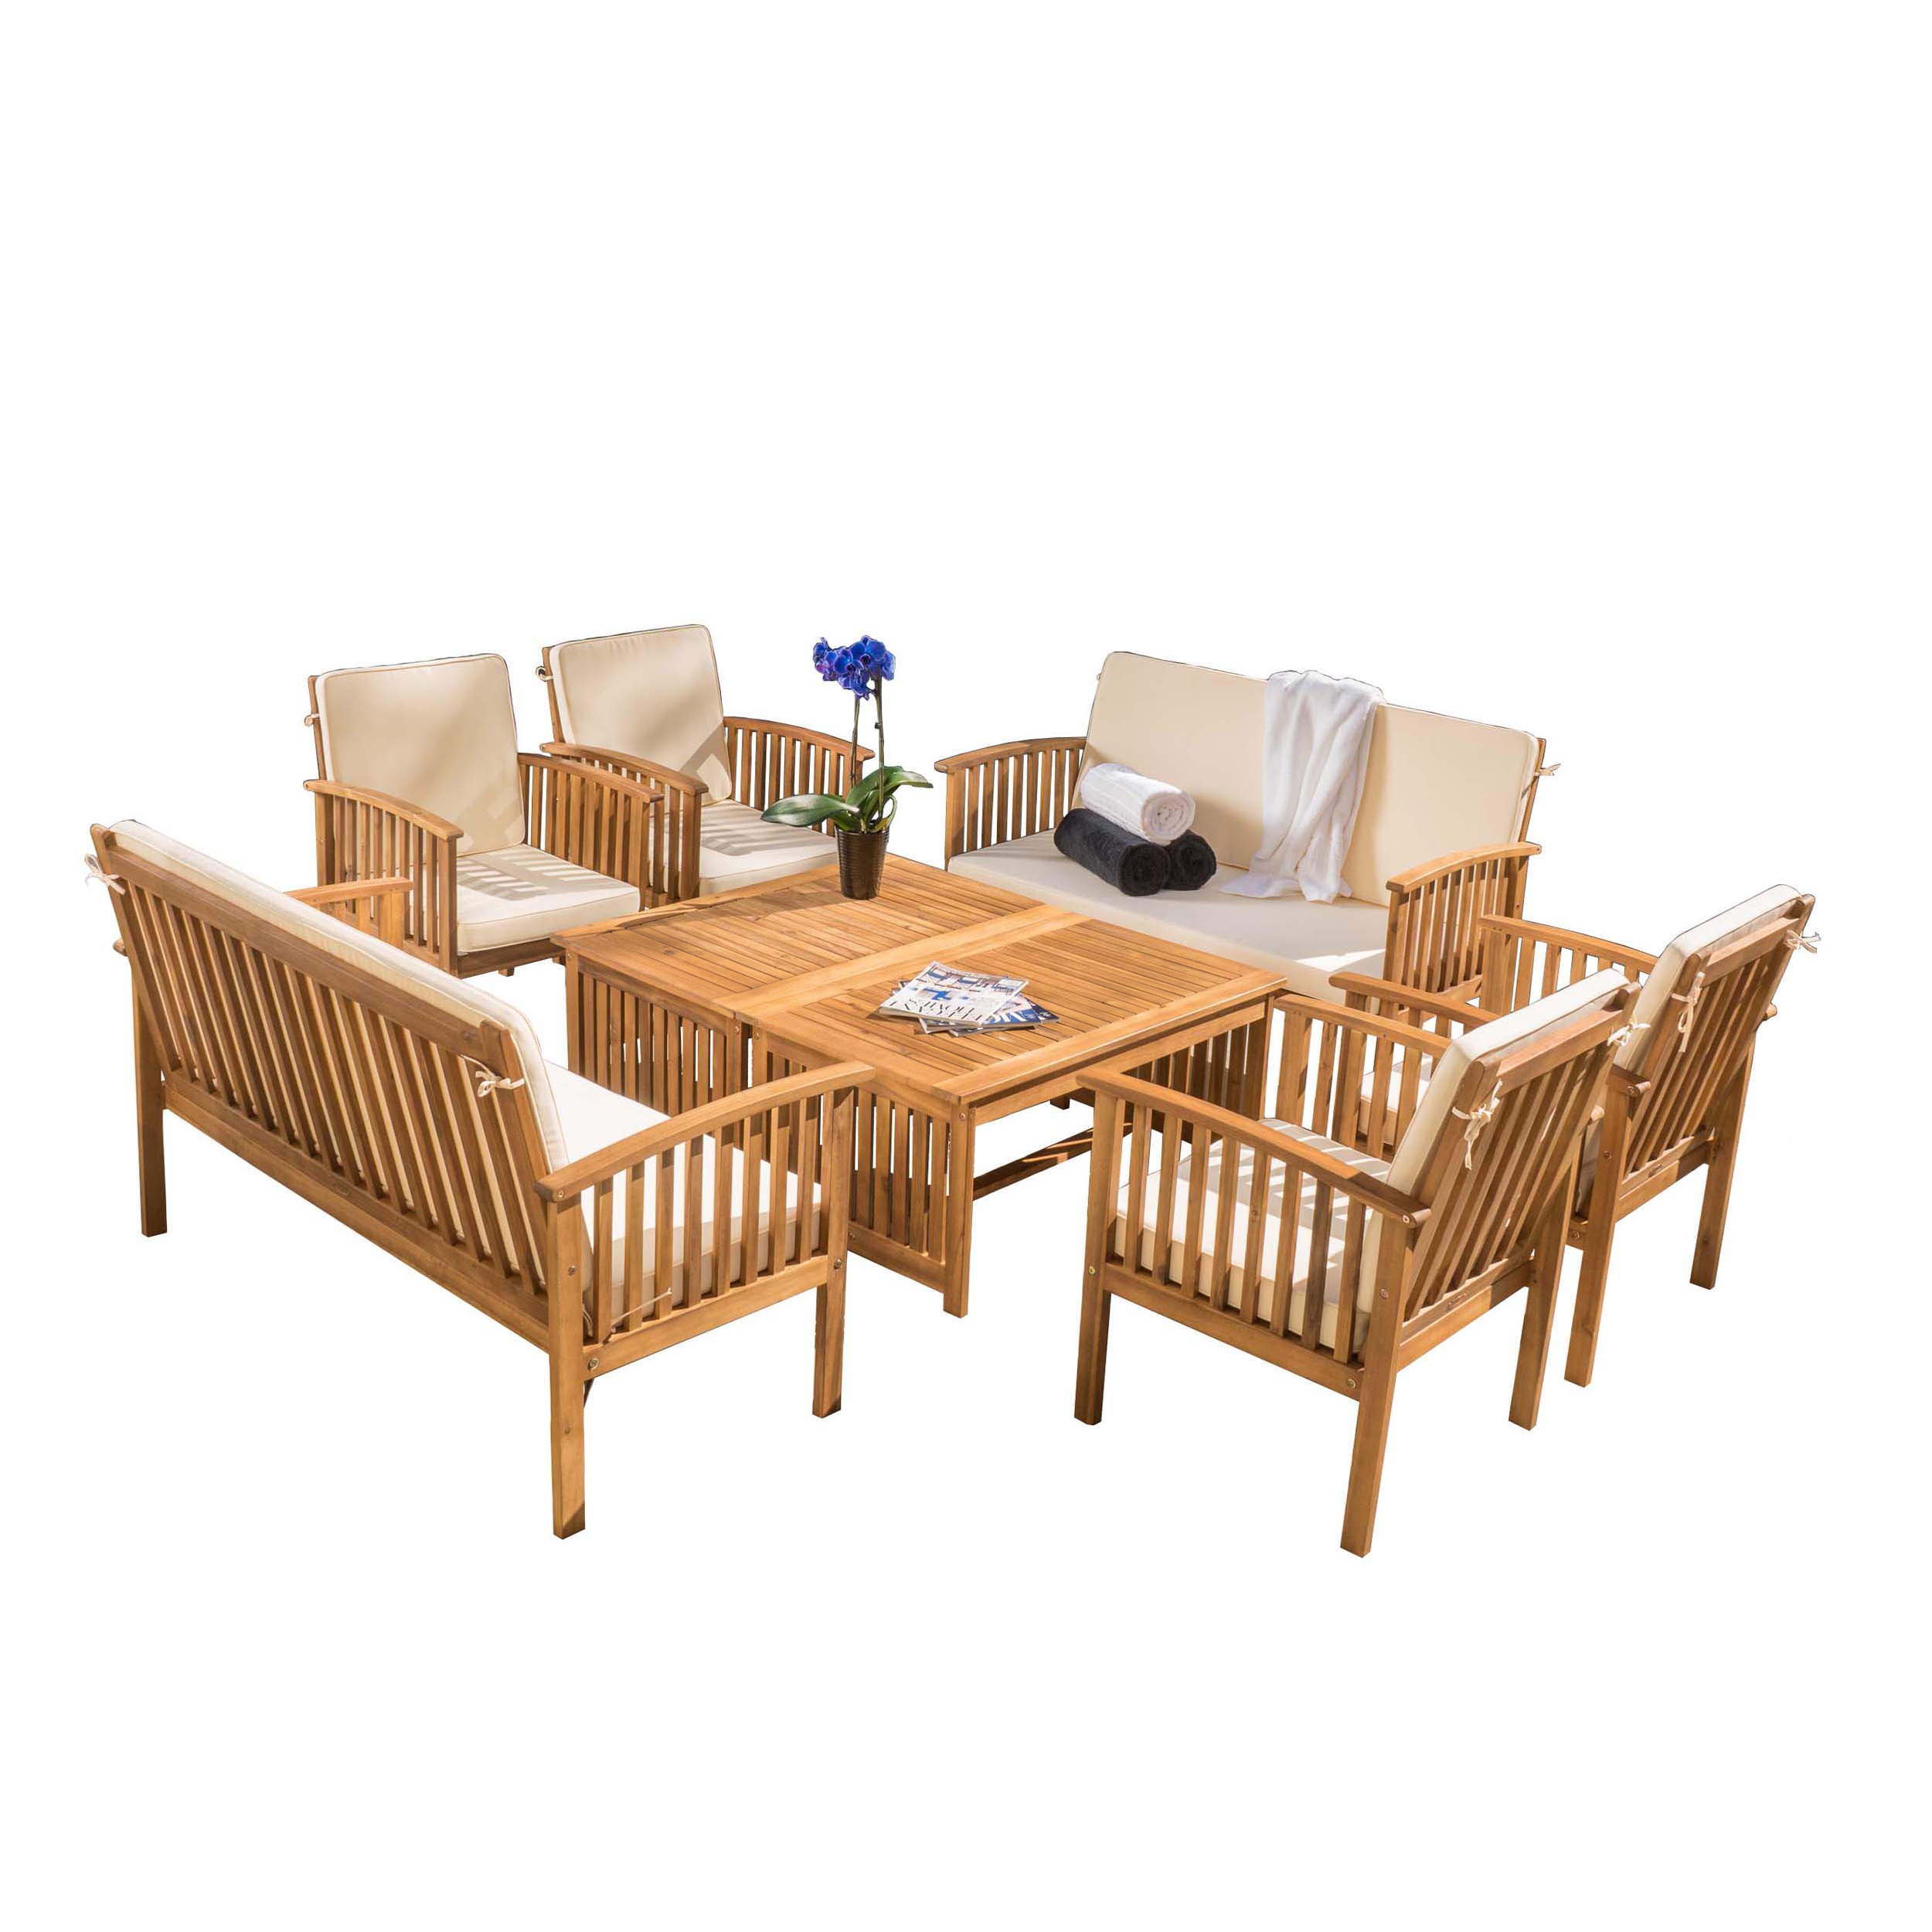 Tucson Outdoor Acacia Wood 8 Seater Sectional Sofa Chat Set with Cushions - image 3 of 8